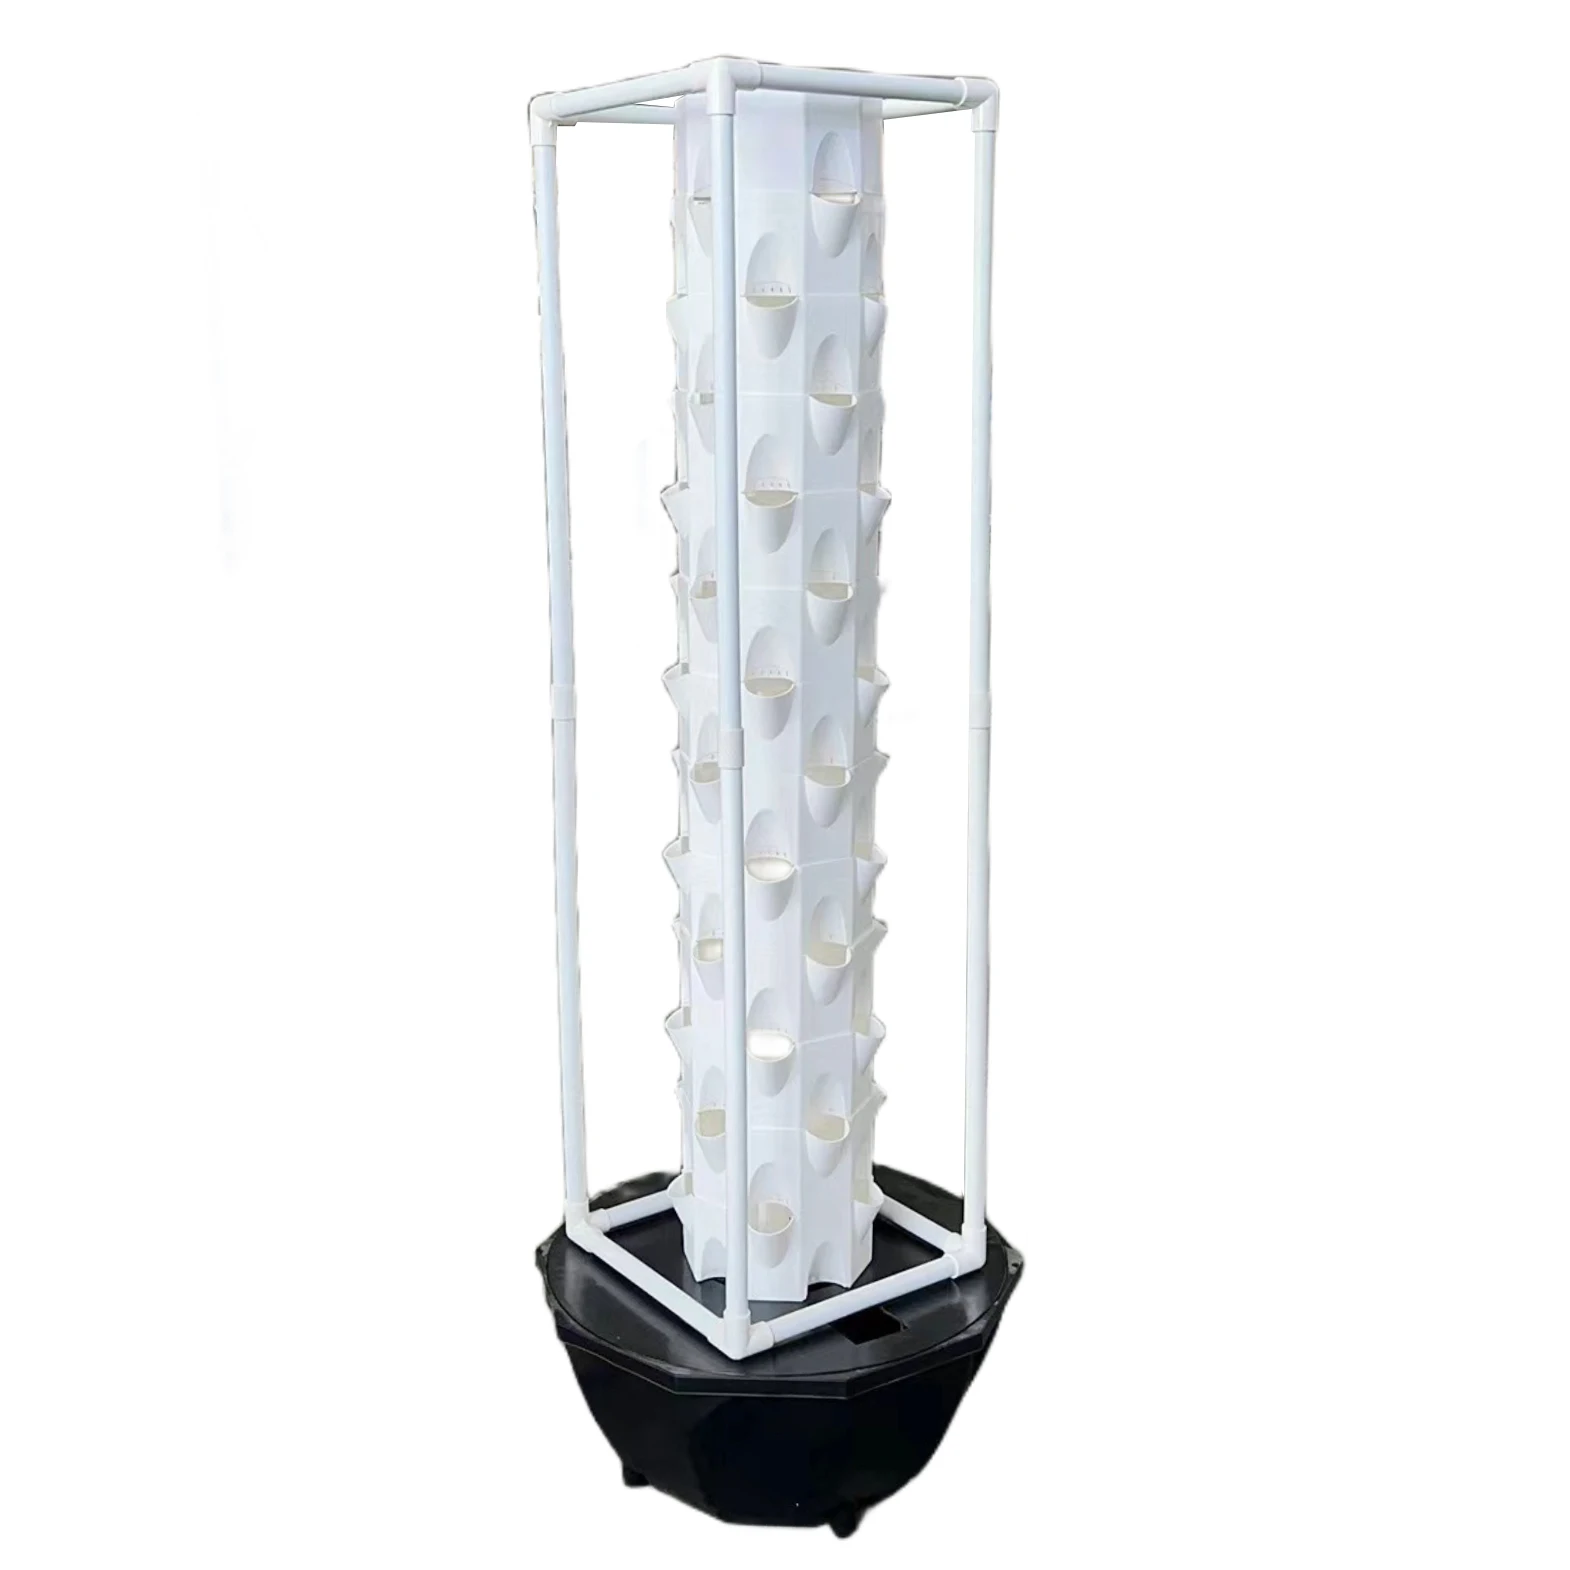 

Indoor NFT Hydroponic Growing Systems Home Vertical Garden Tower with led light